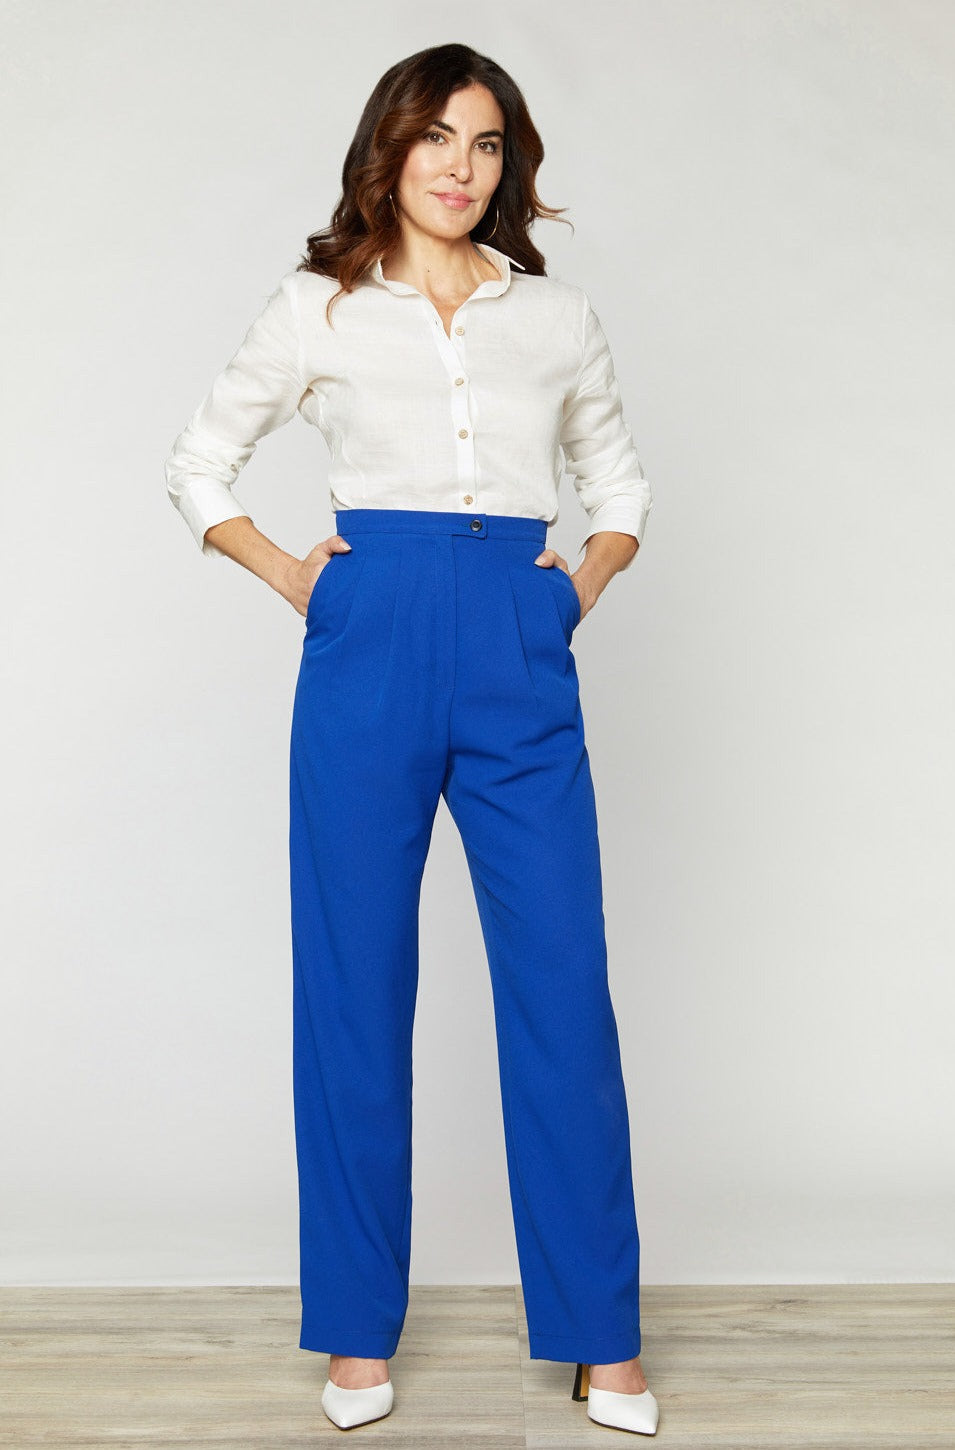 Evelyn Royal Blue Pleated Palazzo Pants